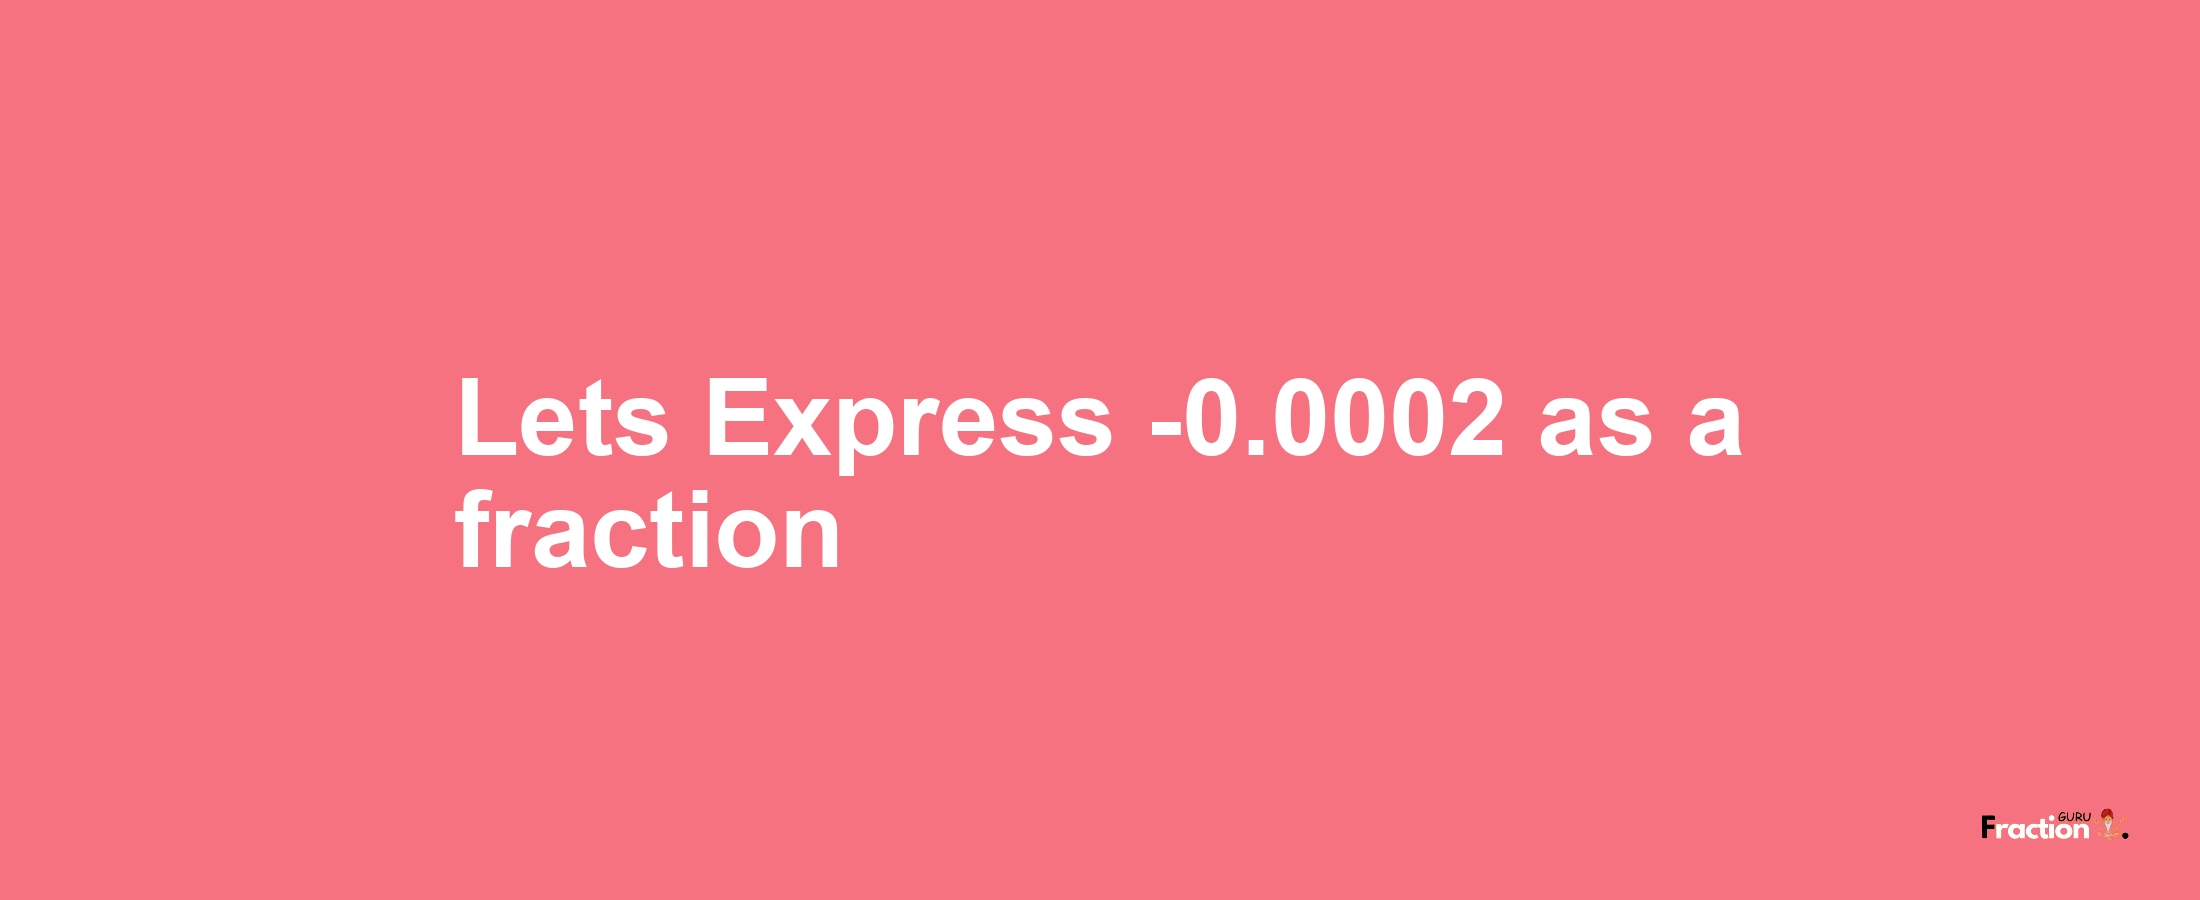 Lets Express -0.0002 as afraction